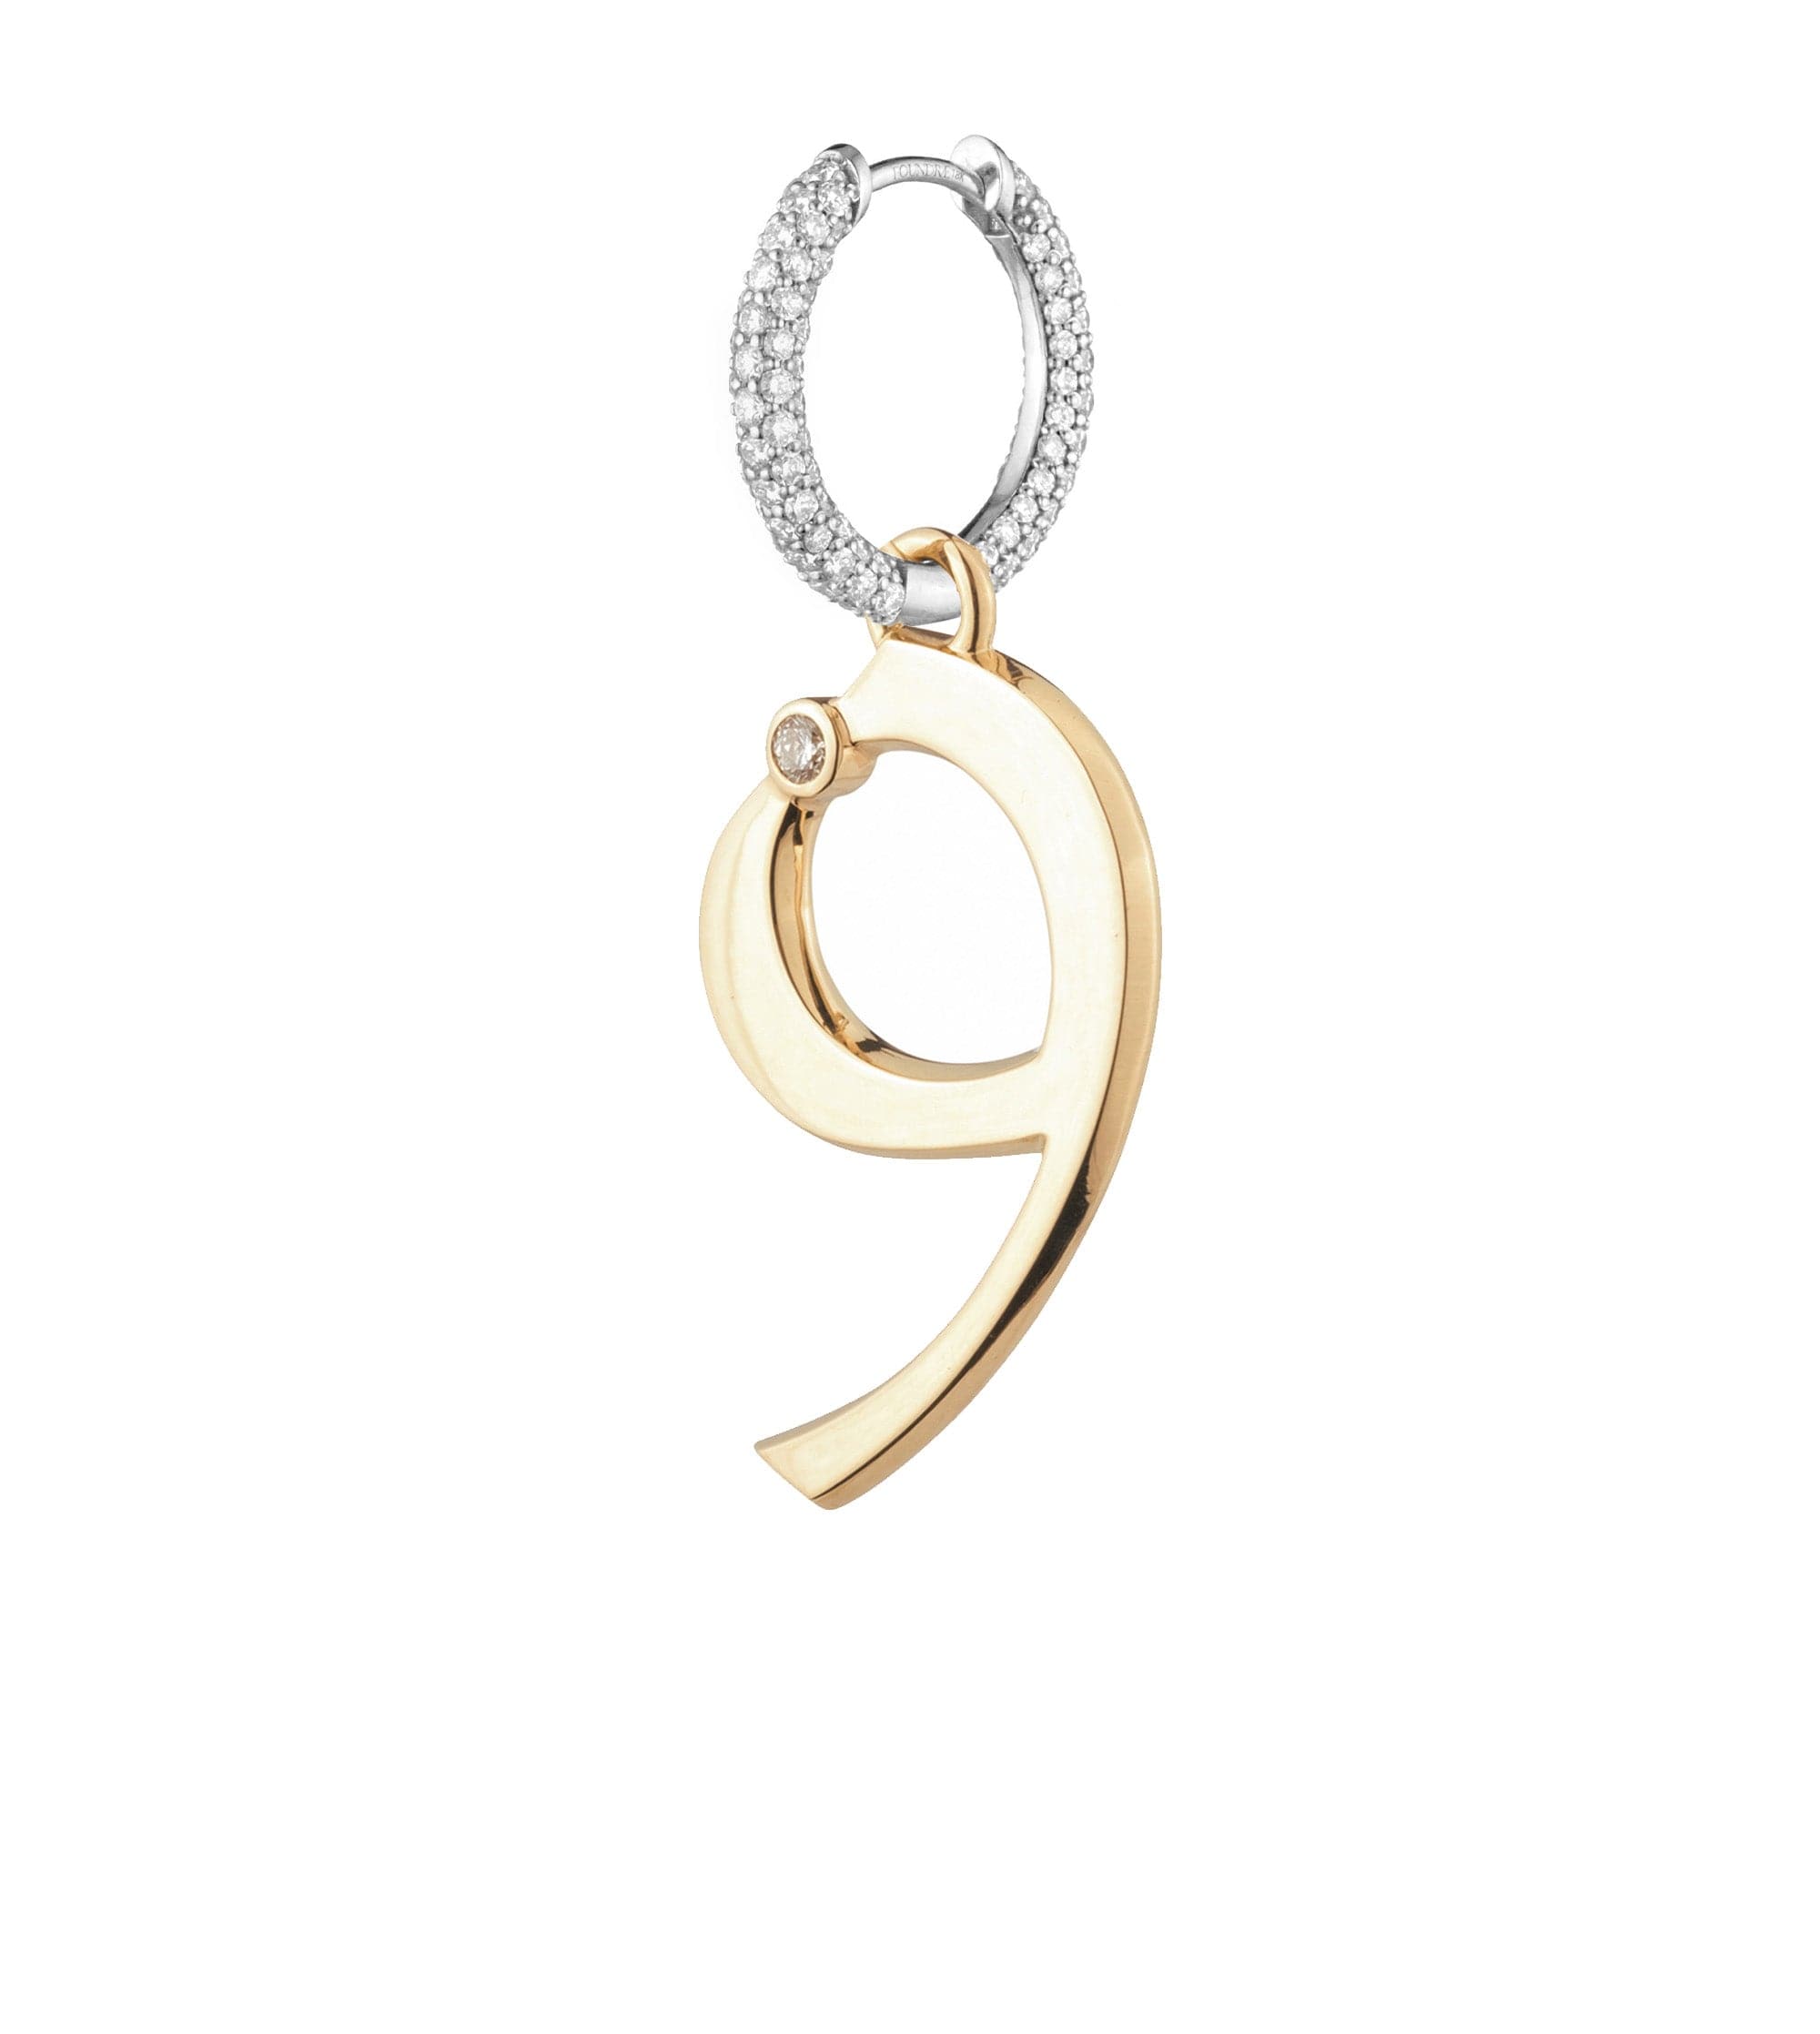 Engravable Number 9 : Oversized Small Pave Chubby Ear Hoop